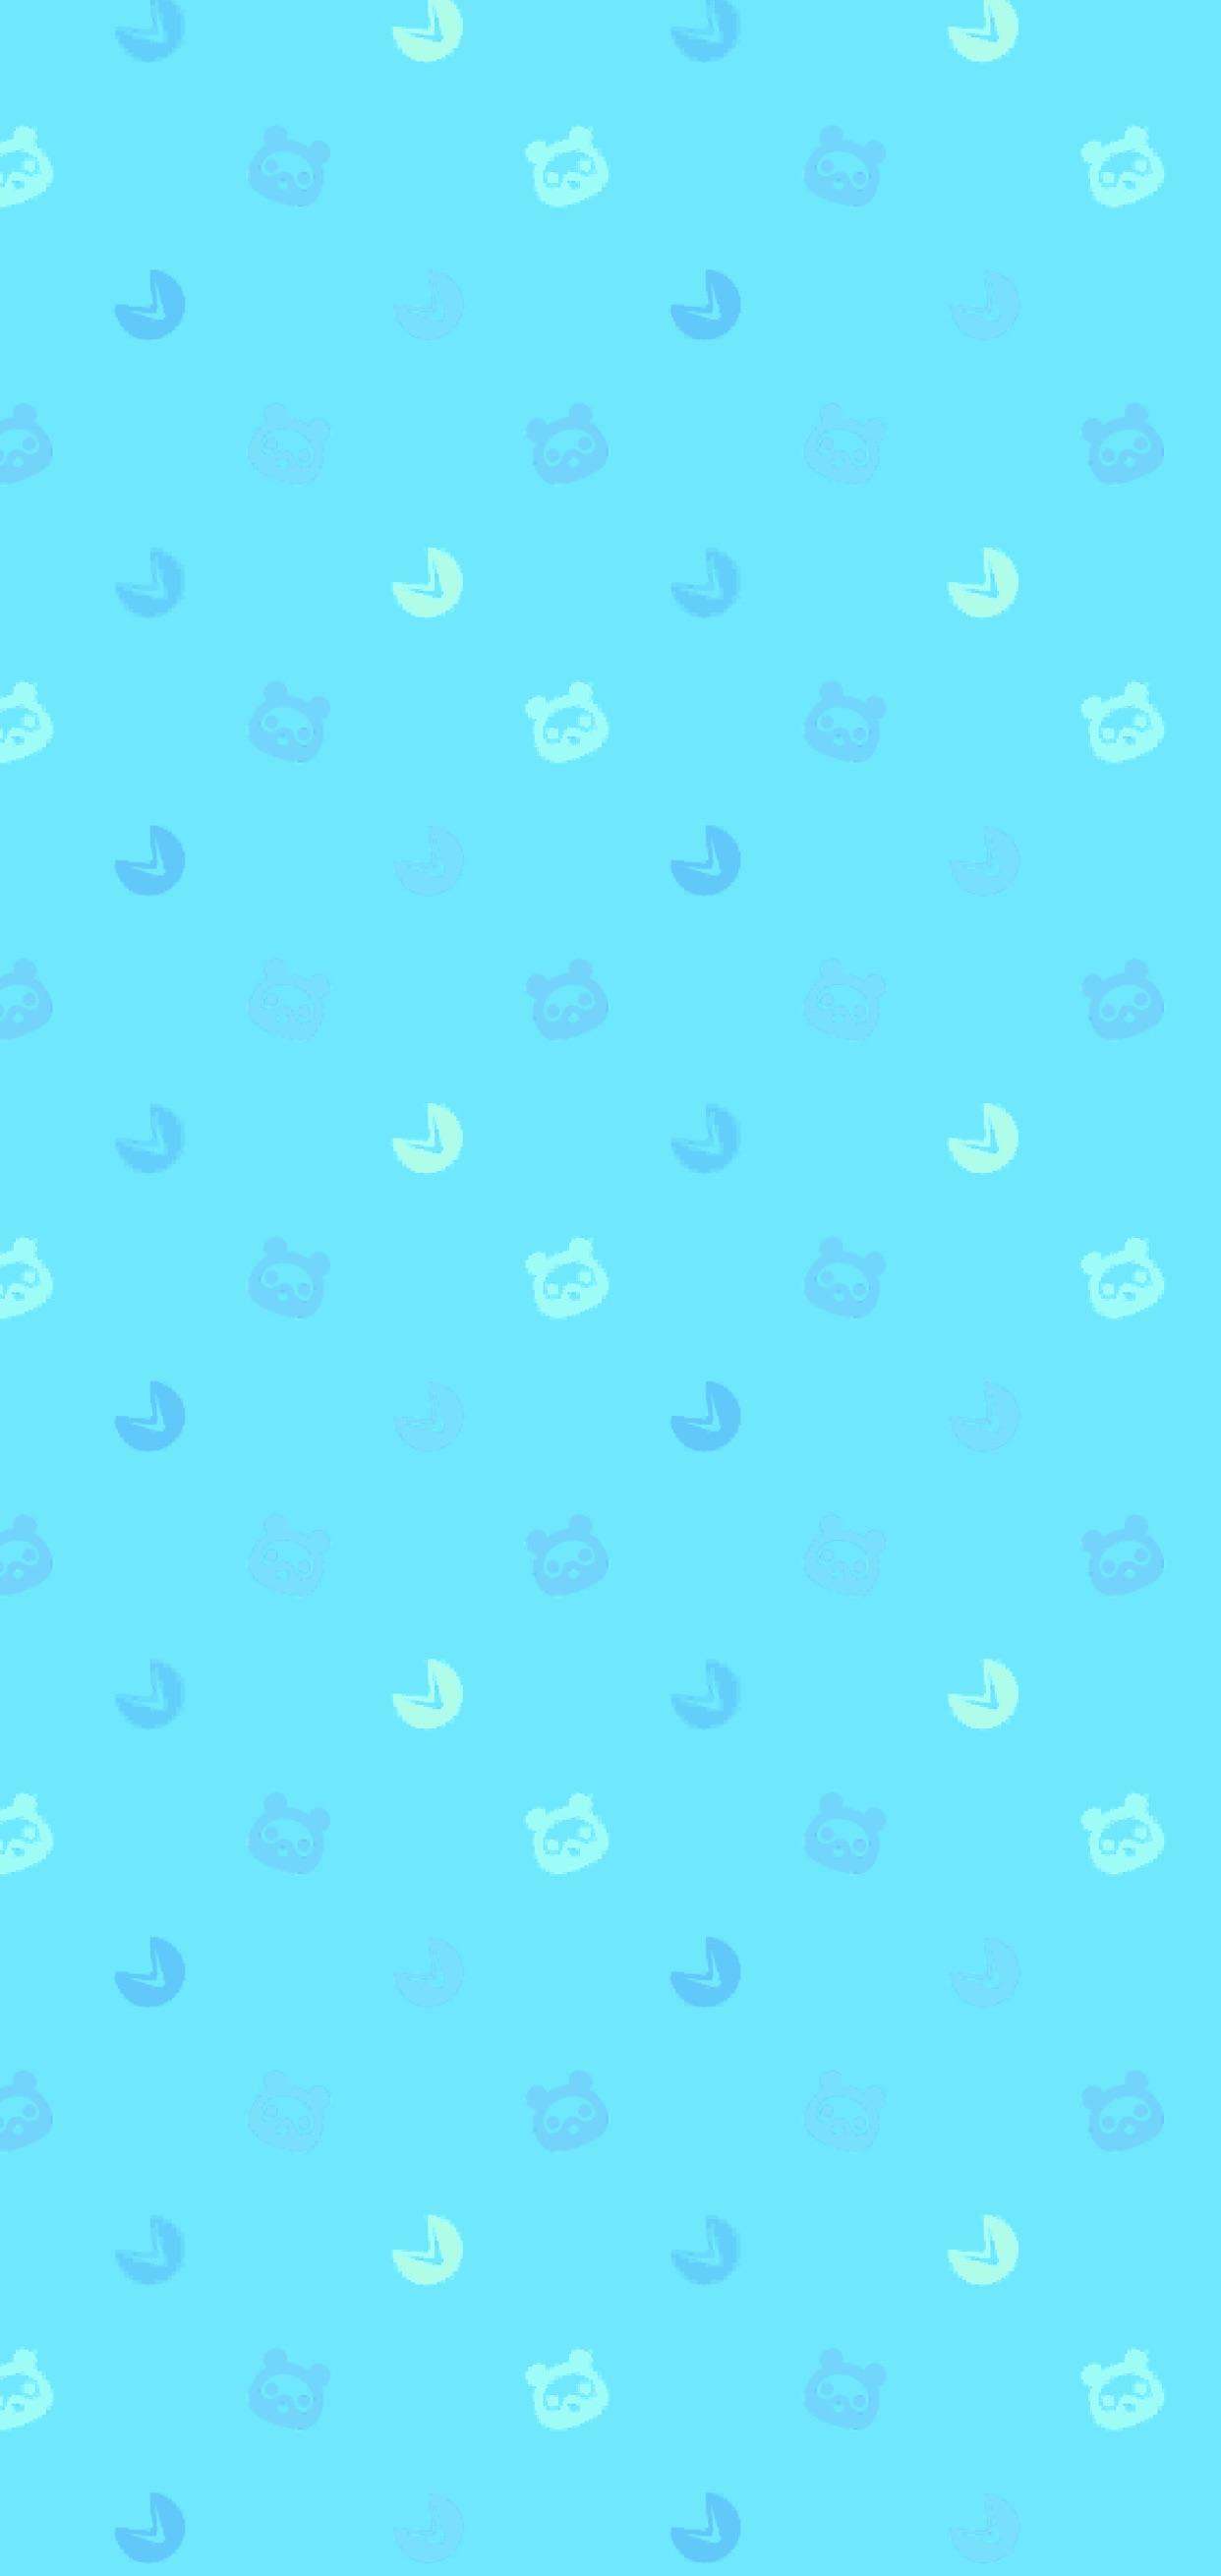 Blue patterned wallpaper with blue and yellow ducks and a blue background - Animal Crossing, cyan